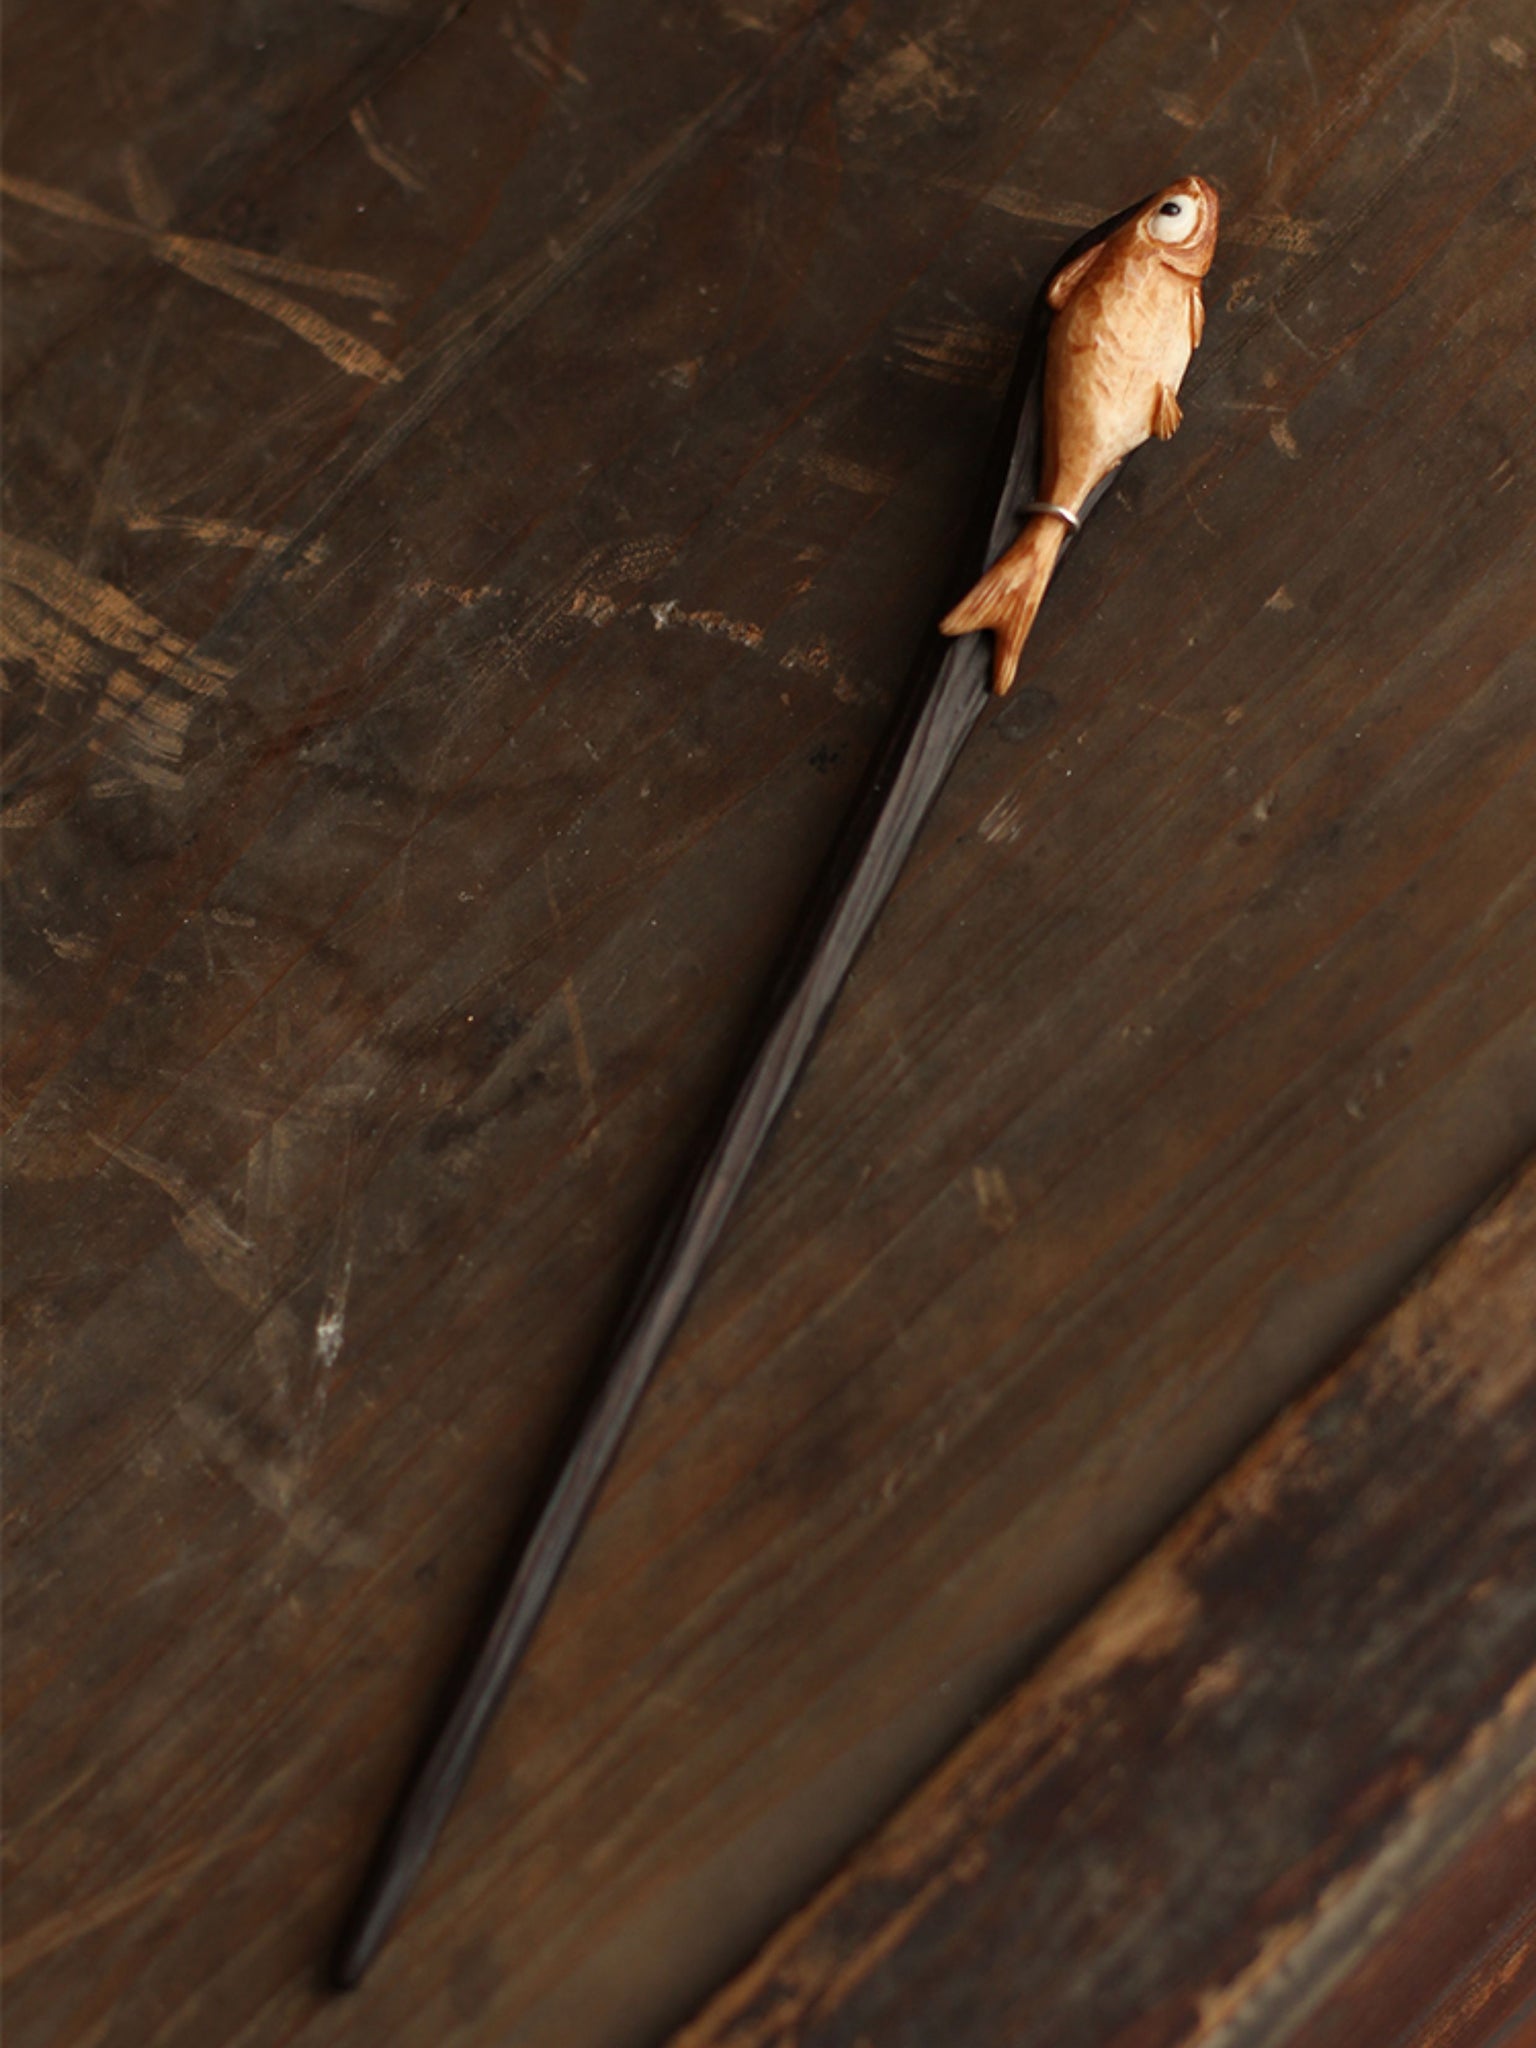 "River God" - Artistic Hairpin Hand-Crafted with Ebony, S925 Silver, and Elk Horn